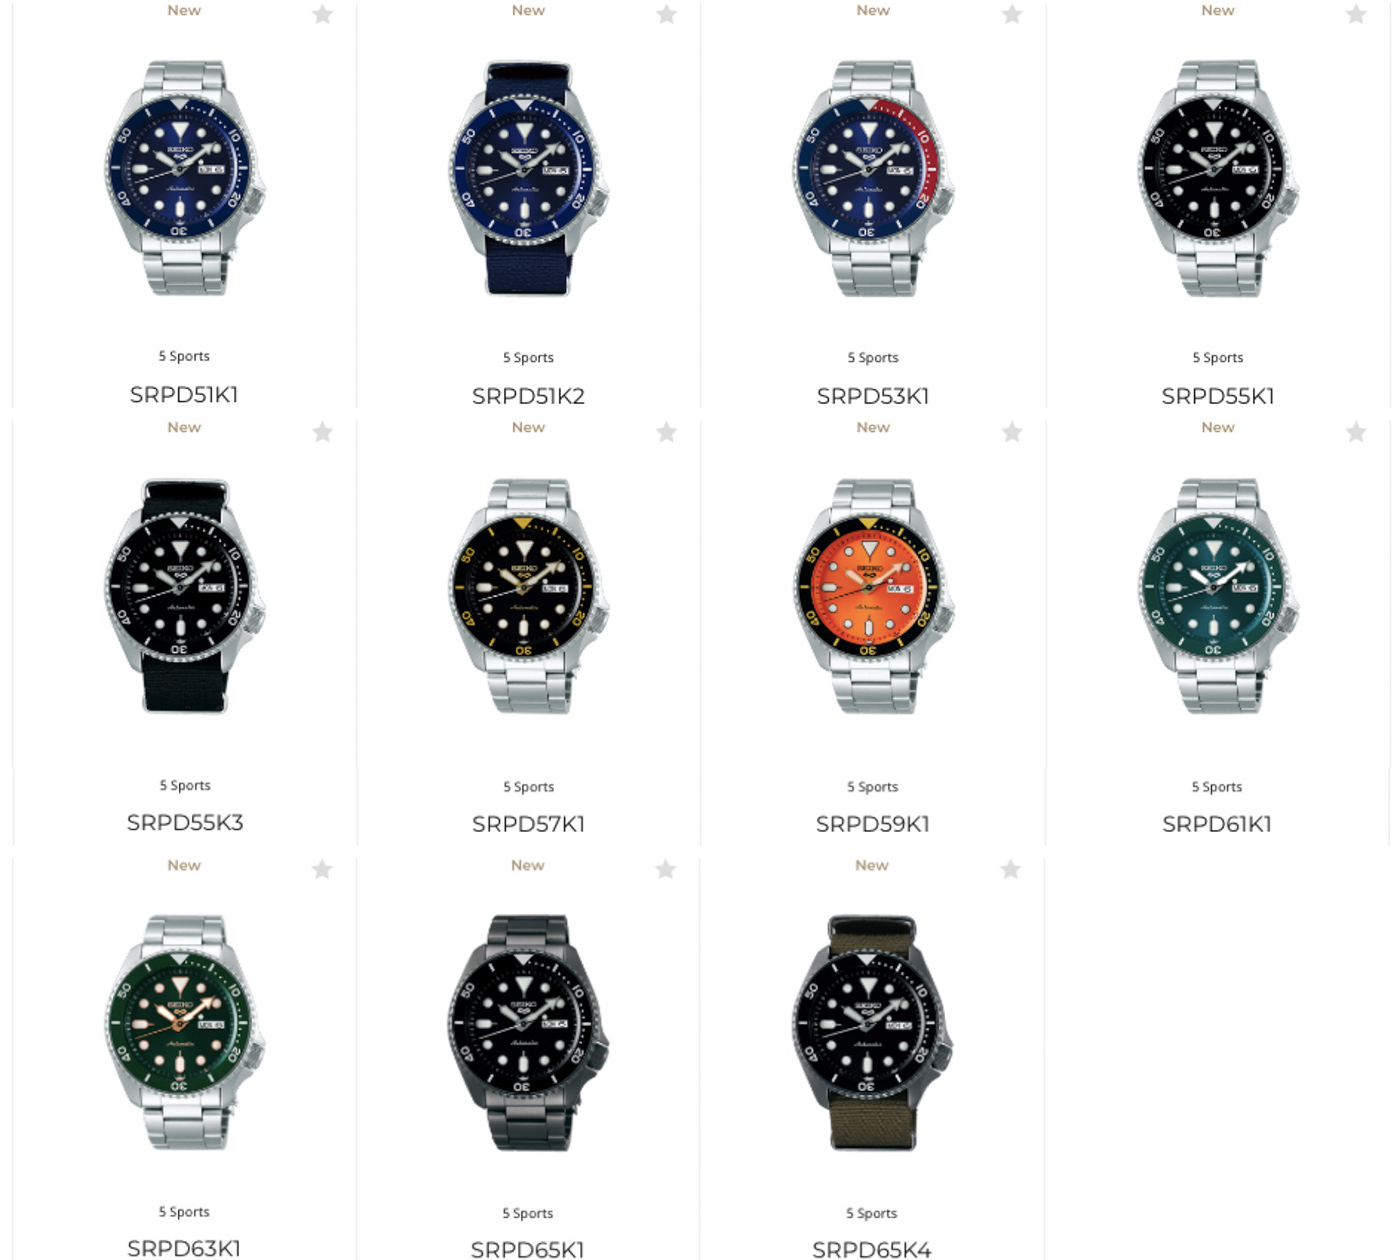 5 Sports Watch Collection Completely Revised For 2019 | aBlogtoWatch